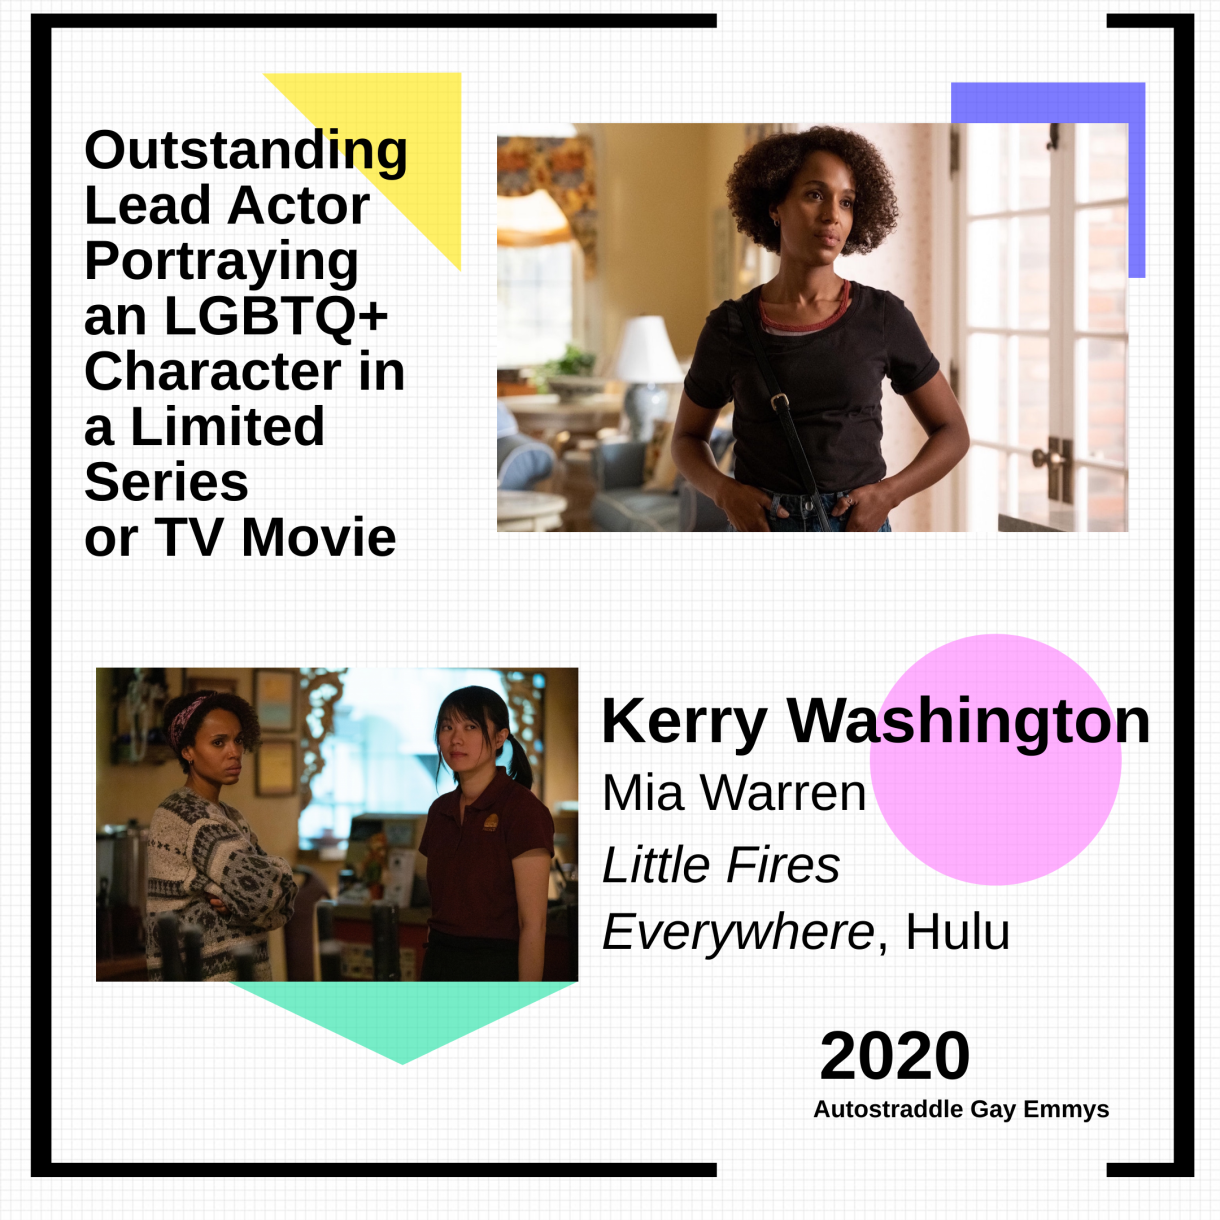 Colorful graphic announcing winner of Outstanding LGBTQ+ Character in a Limited Series or TV Movie: Kerry Washington for Little Fires Everywhere